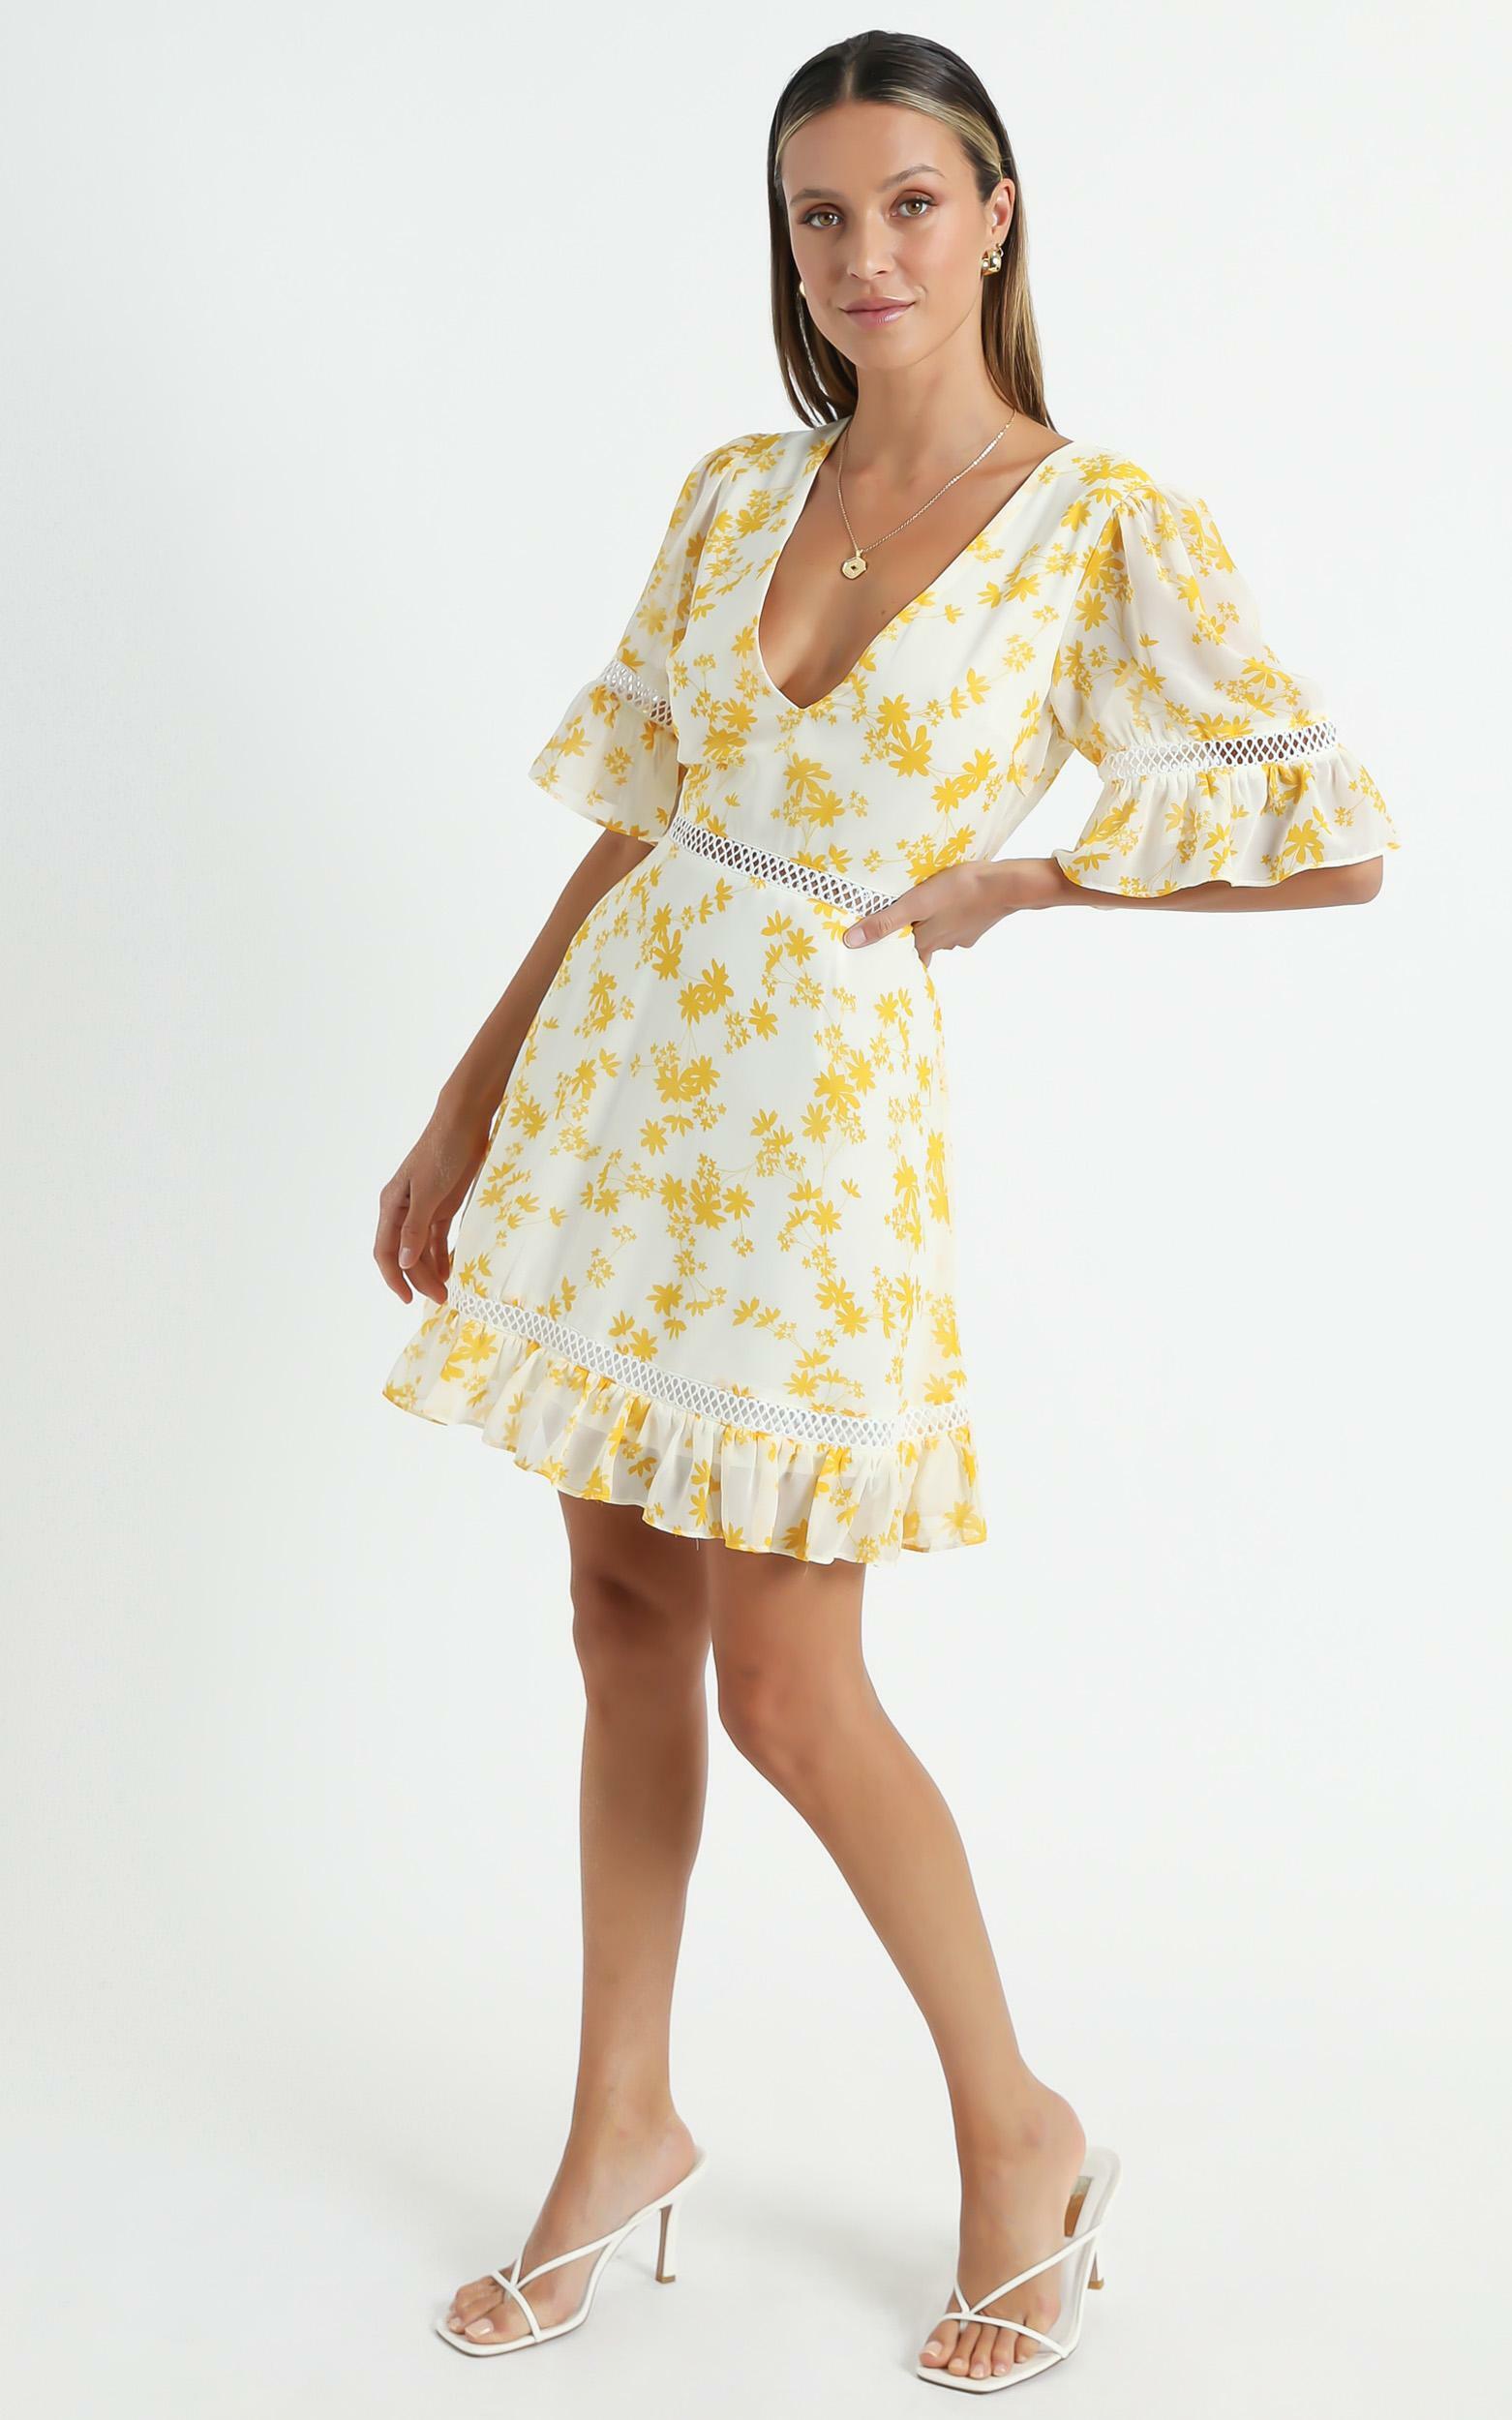 My Darkest Night Dress in Yellow Floral - 04, YEL1, hi-res image number null